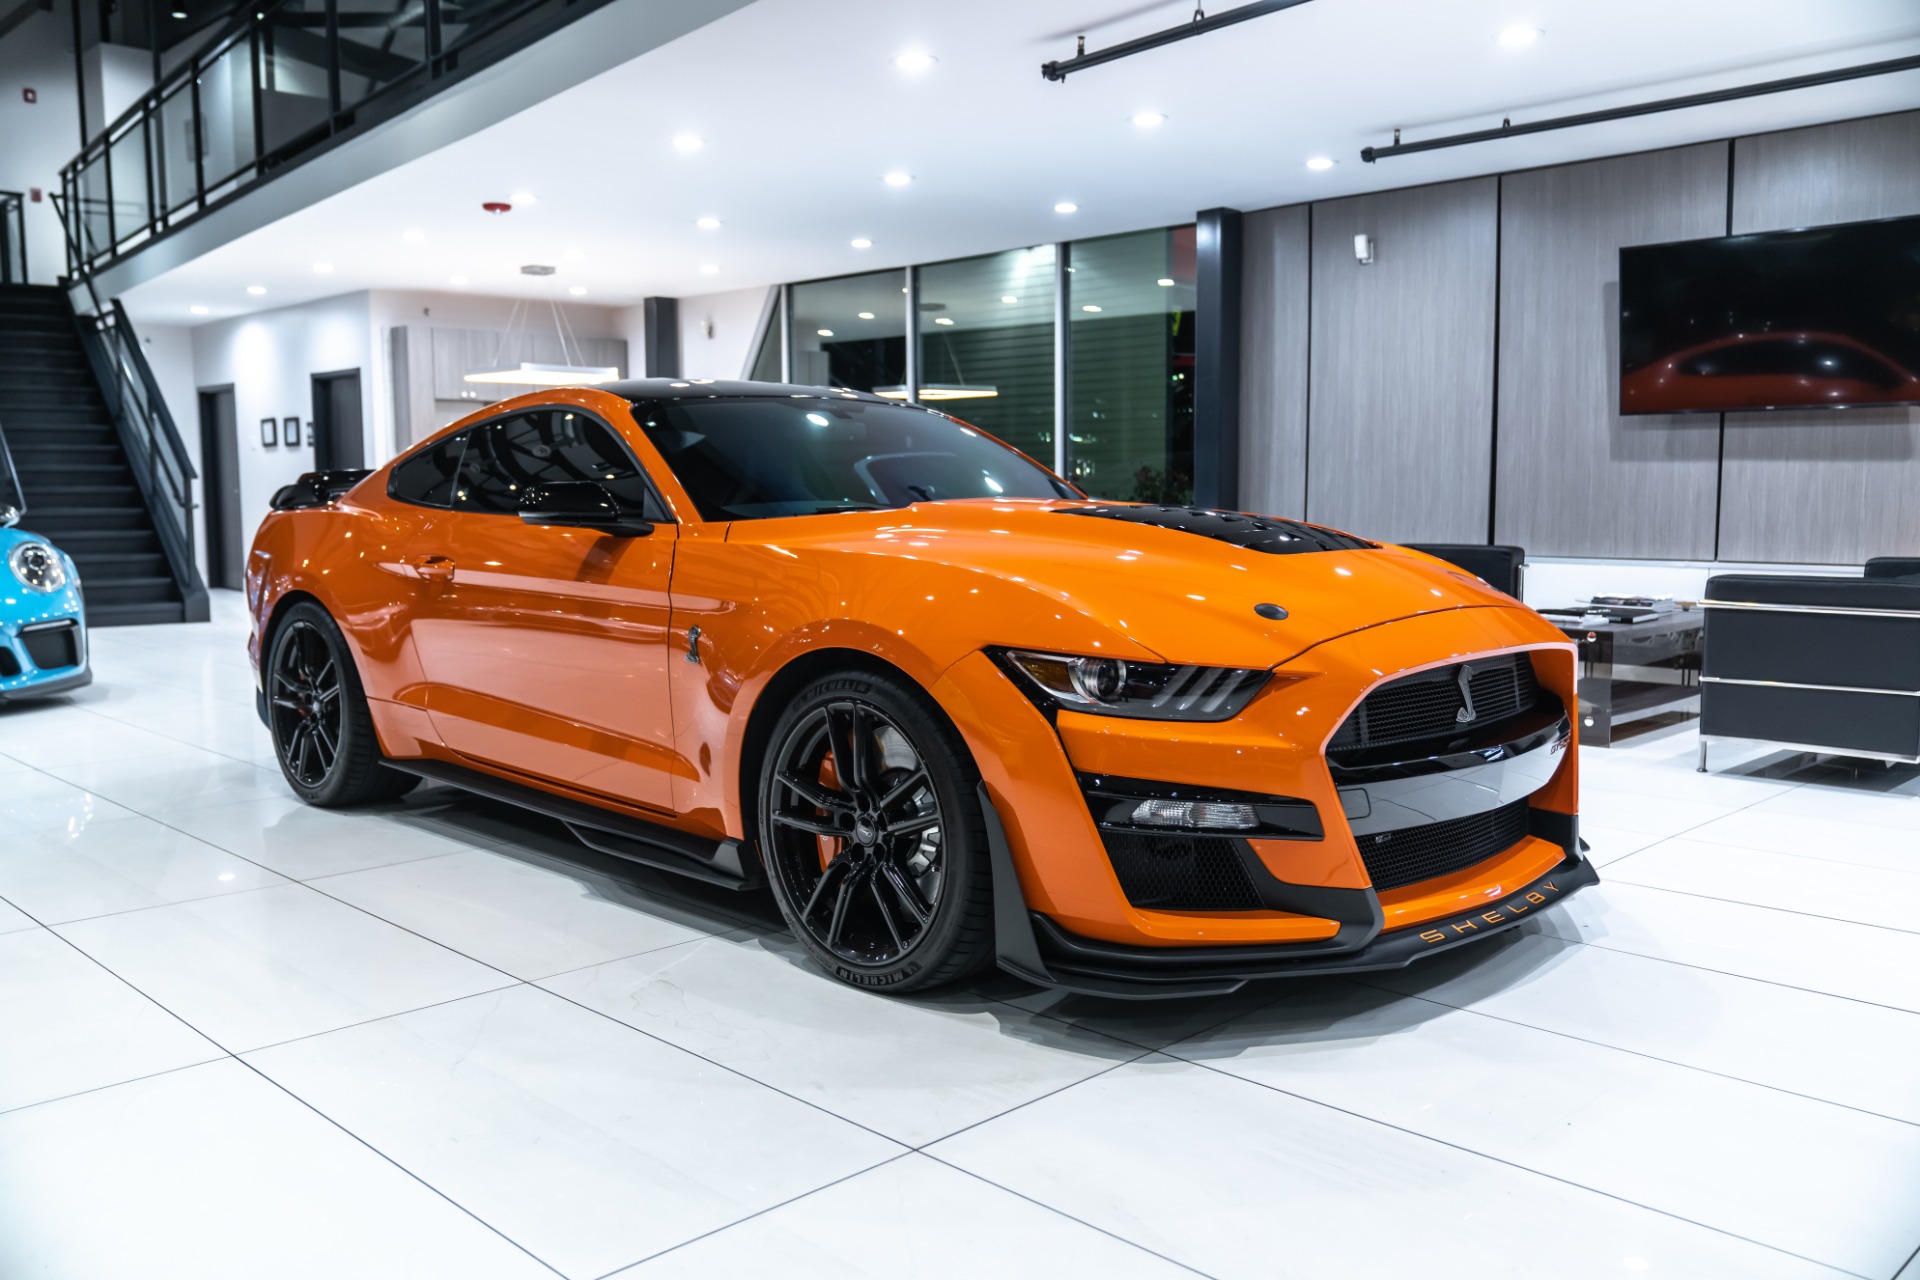 Used-2020-Ford-Mustang-Shelby-GT500-Coupe-Twister-Orange-Tech-Pkg-Handling-Pkg-Recaro-Seats